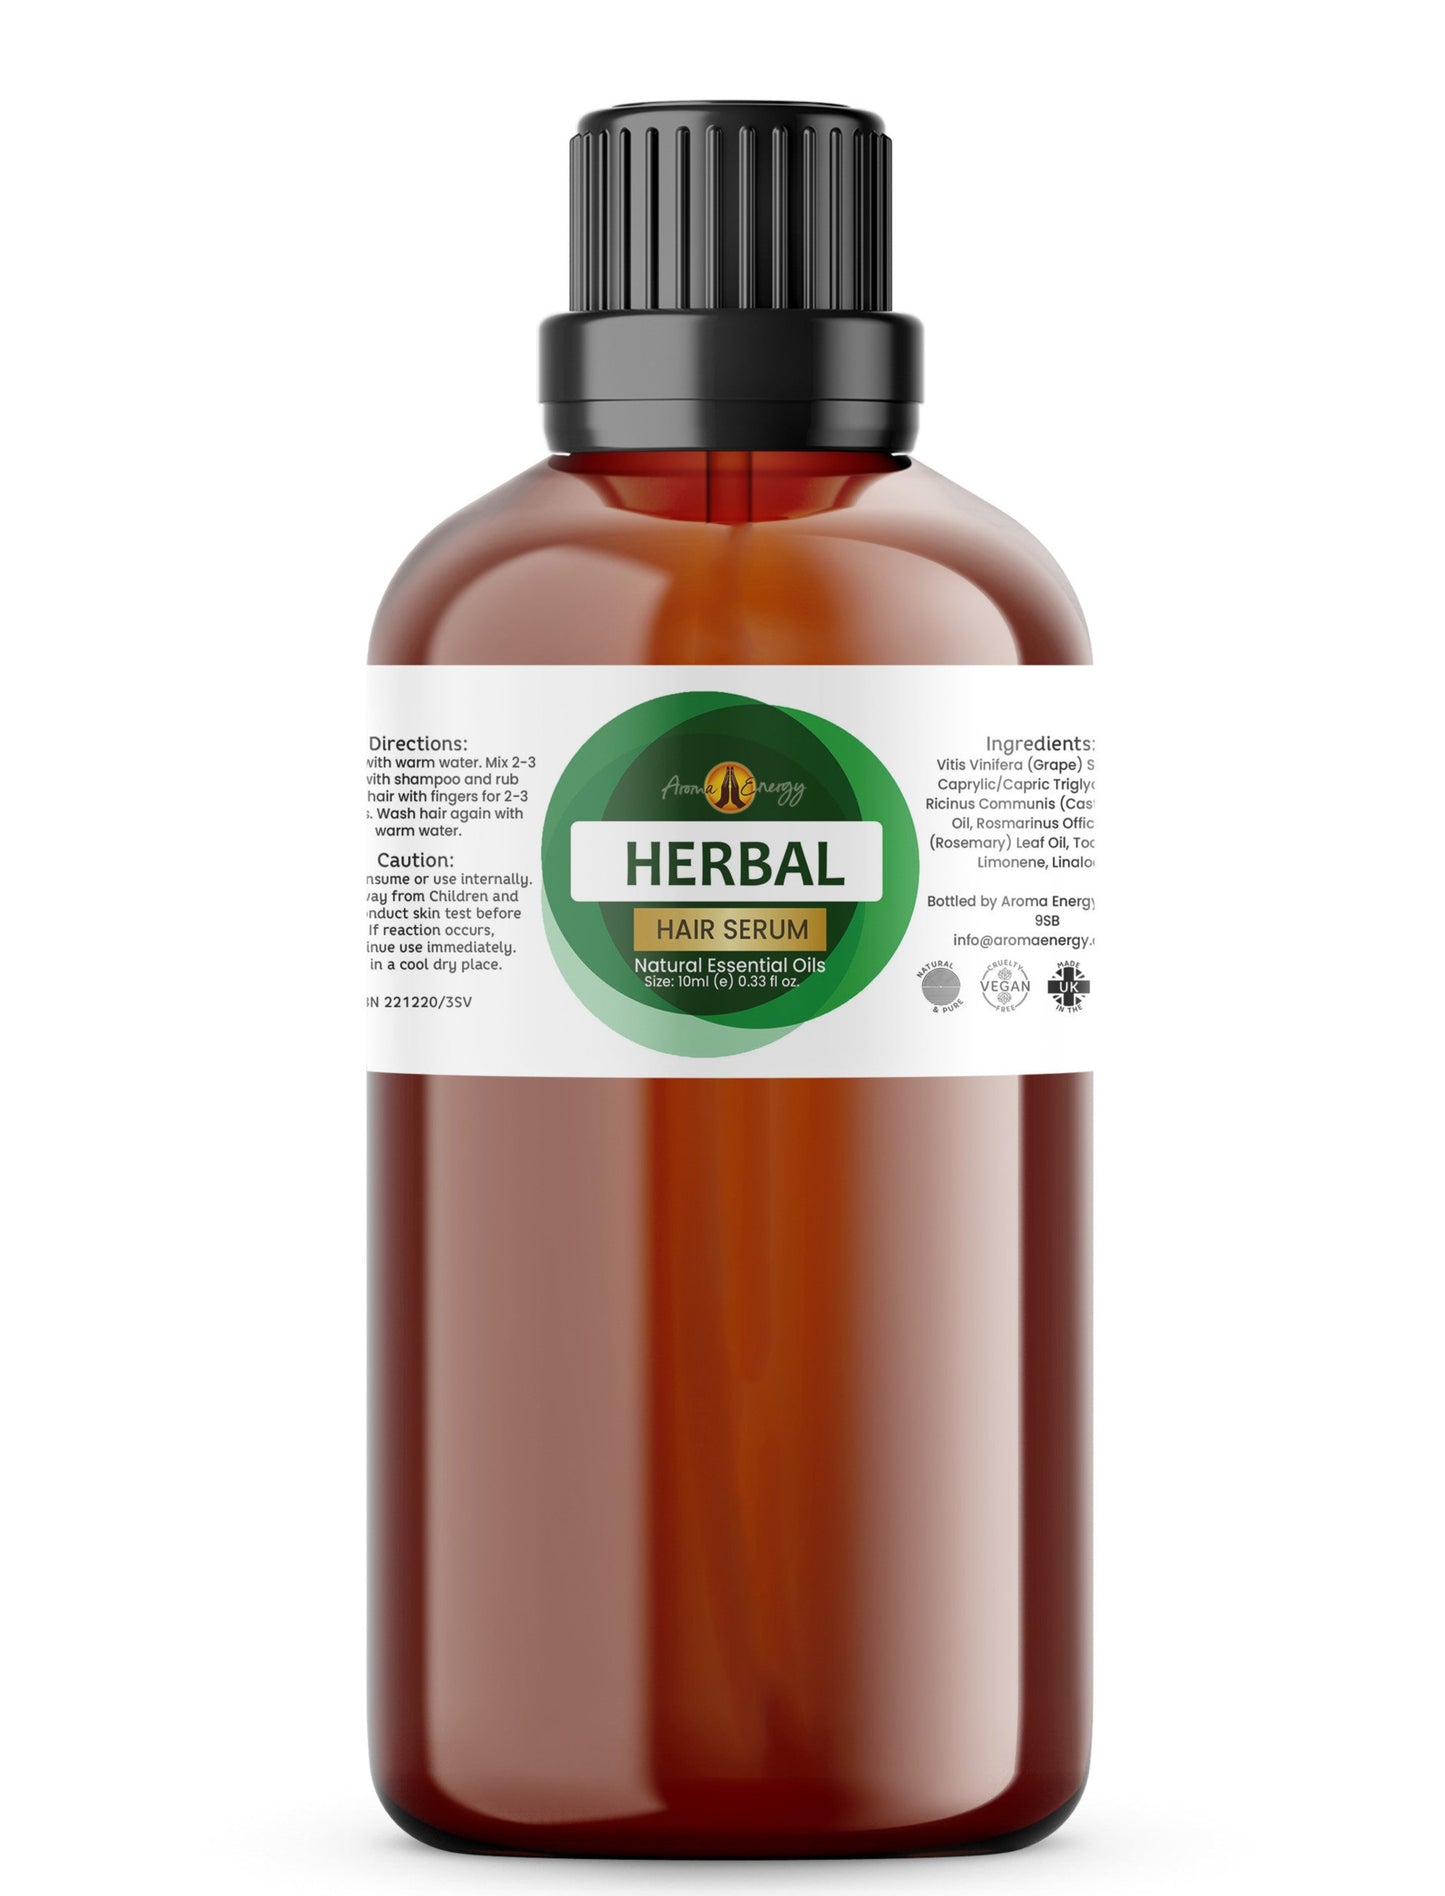 Essential Oil Hair Serum - Herbal - Contains Rosemary, Castor and Vitamin E Oils